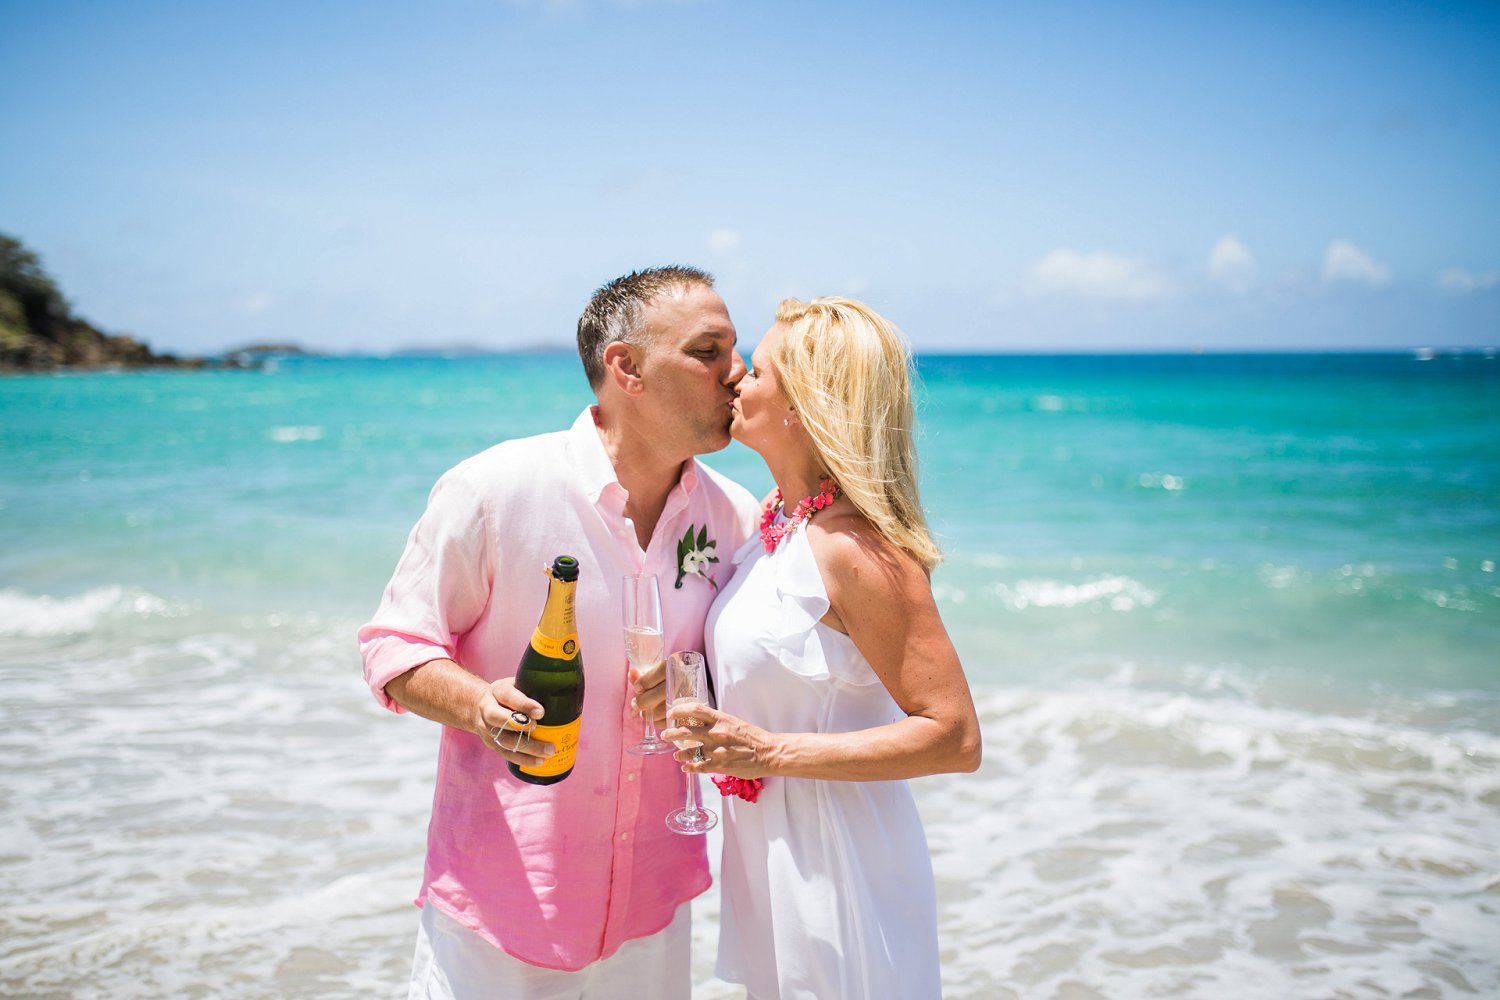 Couple toasts 20 years with Vueve champagne on the beach.